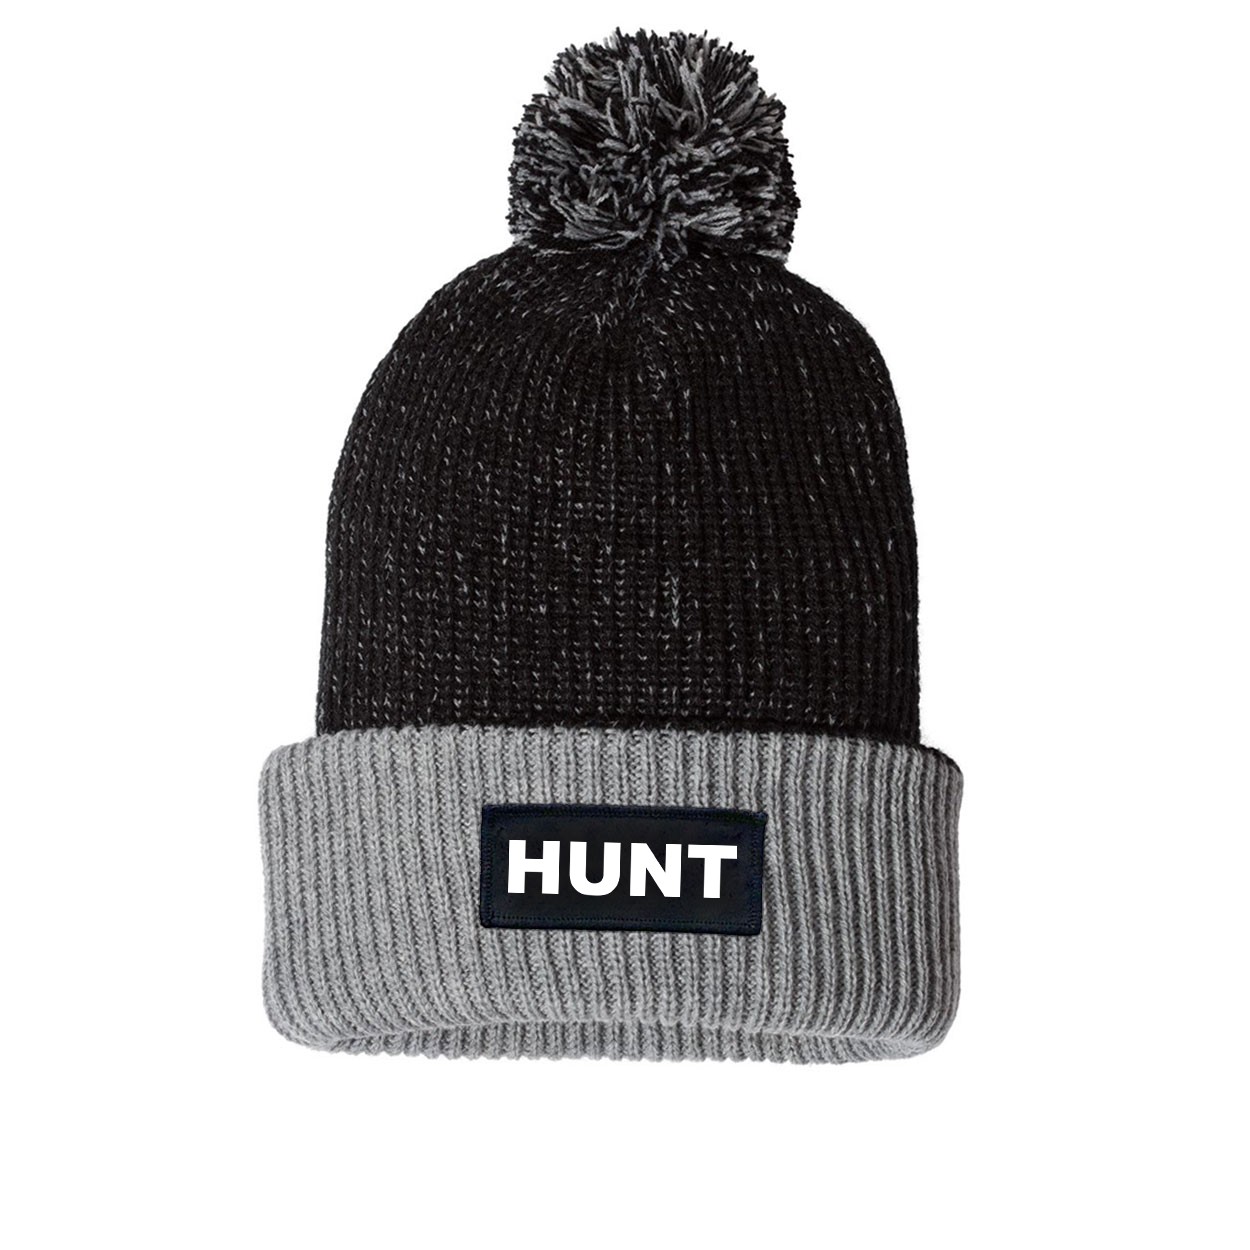 Hunt Brand Logo Night Out Woven Patch Roll Up Pom Knit Beanie Black/Gray (White Logo)